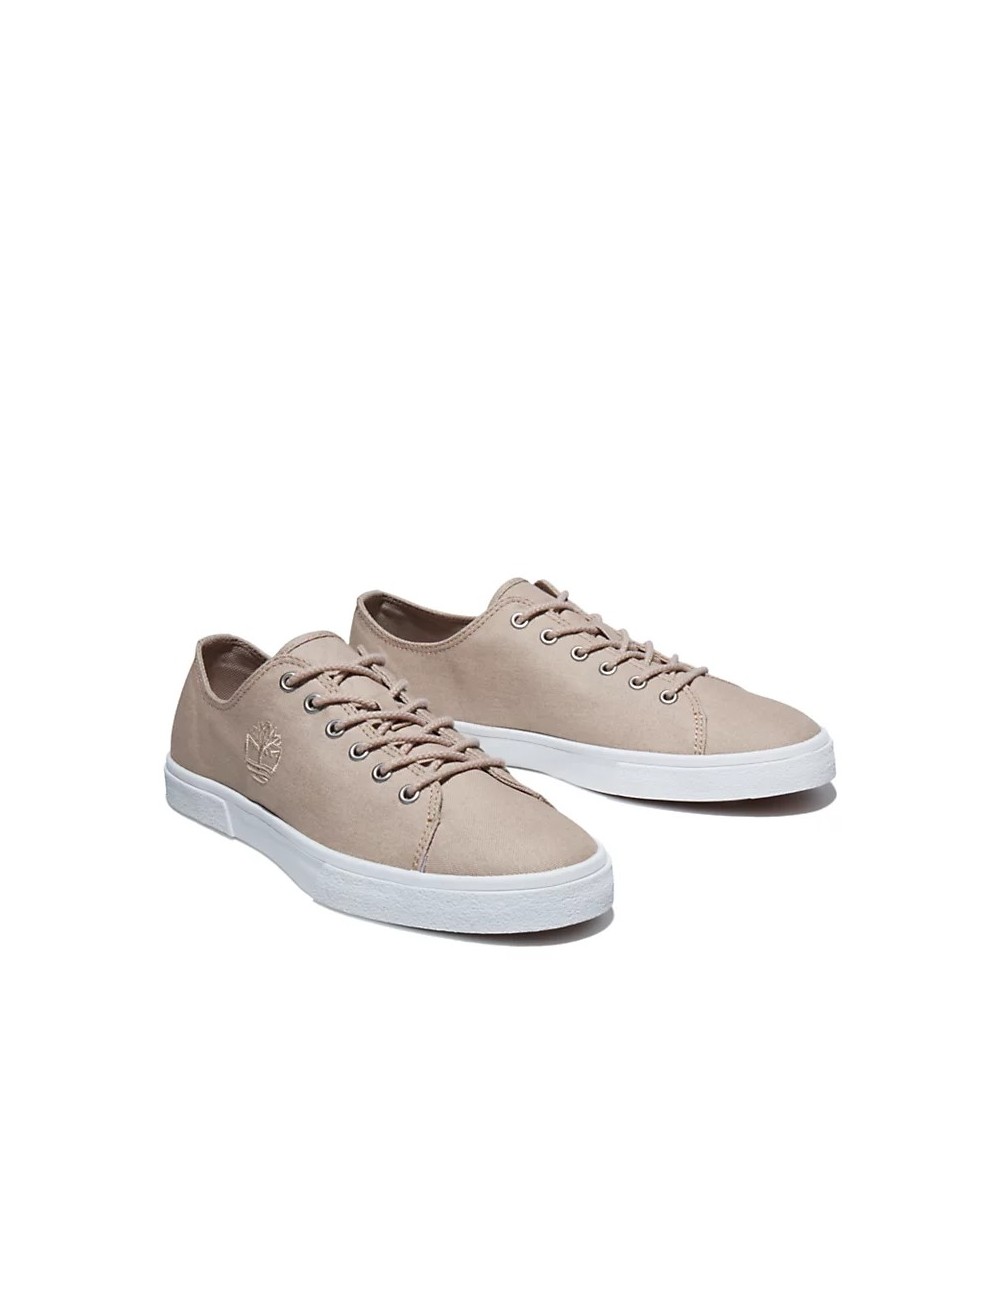 SNEAKERS HOMBRE TIMBERLAND UNION WHARF 2.0 BEIGE